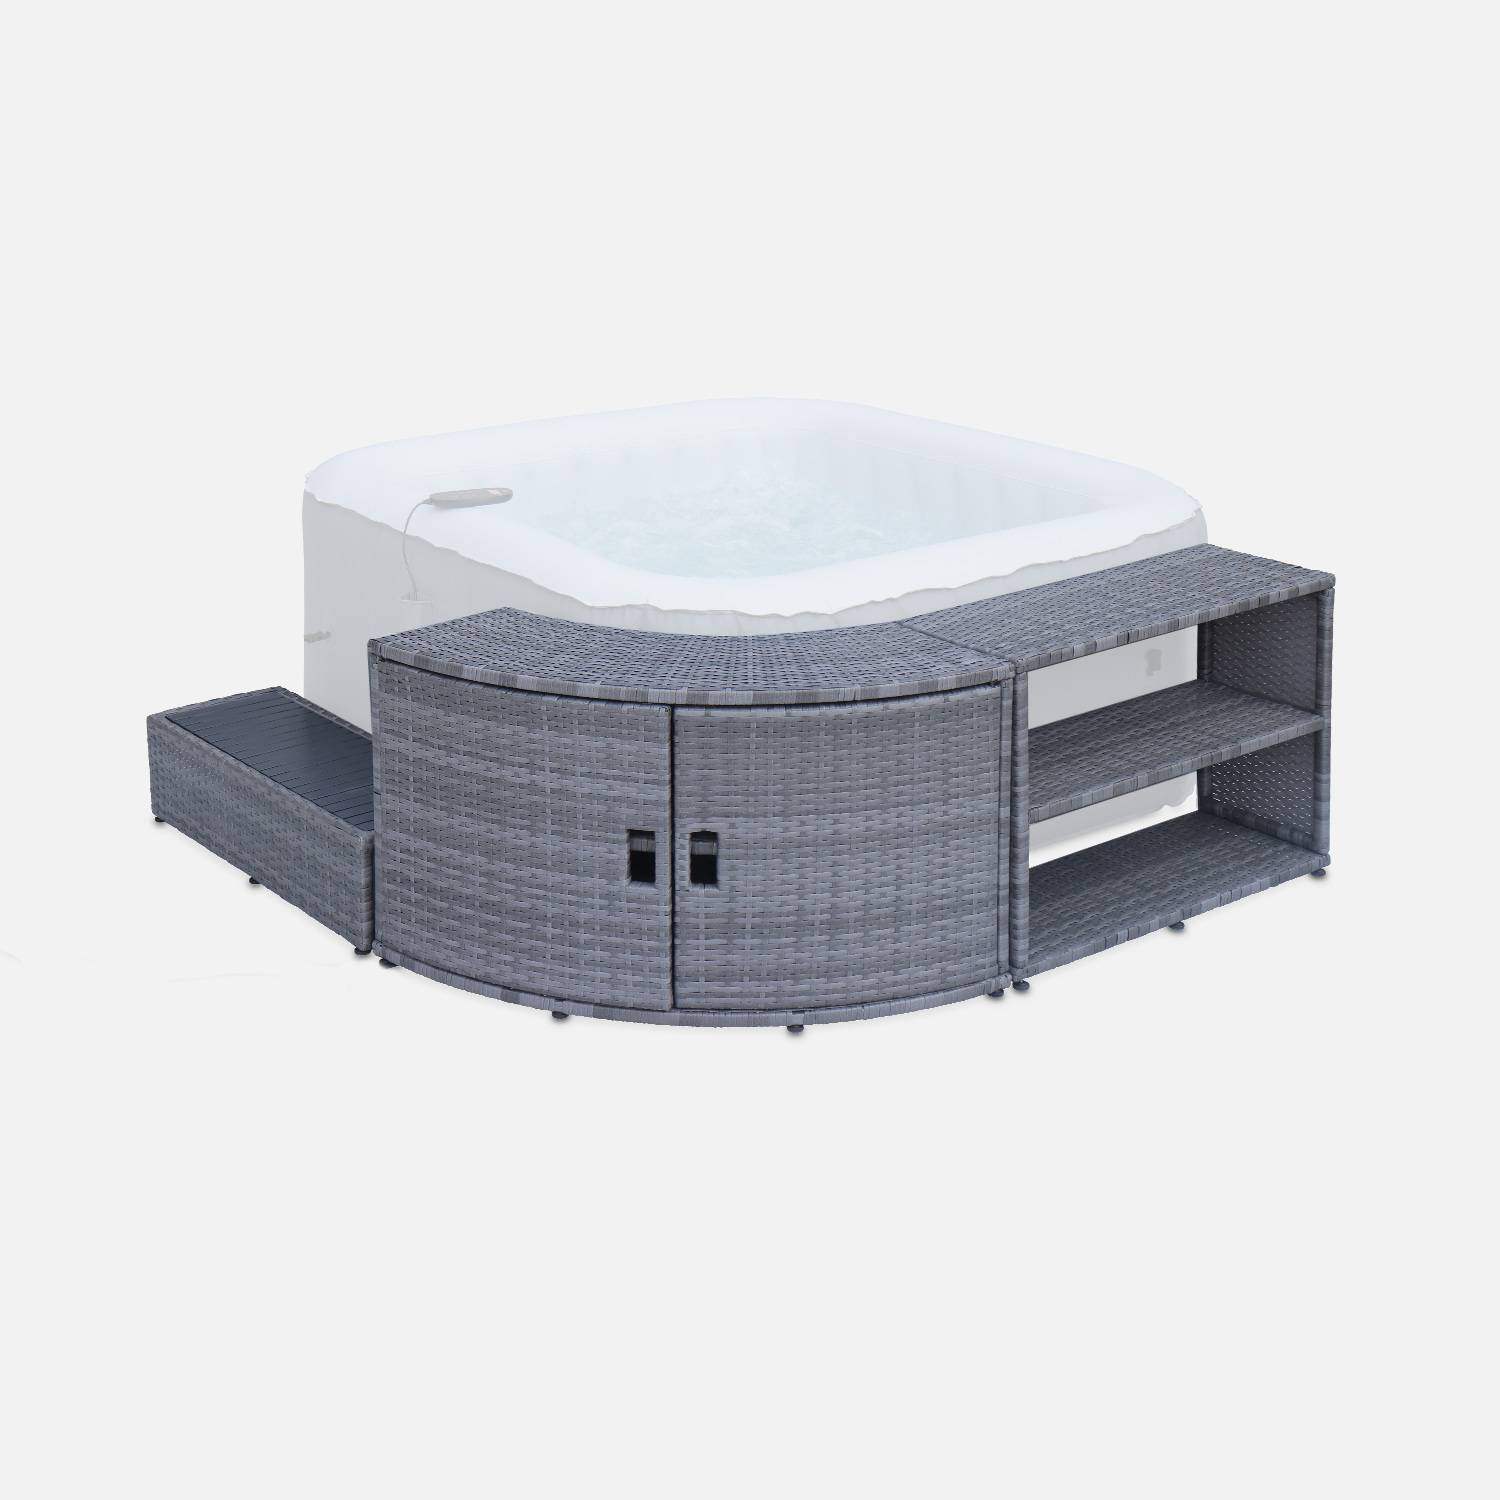 Grey polyrattan surround for square hot tub with cabinet, shelf and footstep,sweeek,Photo1